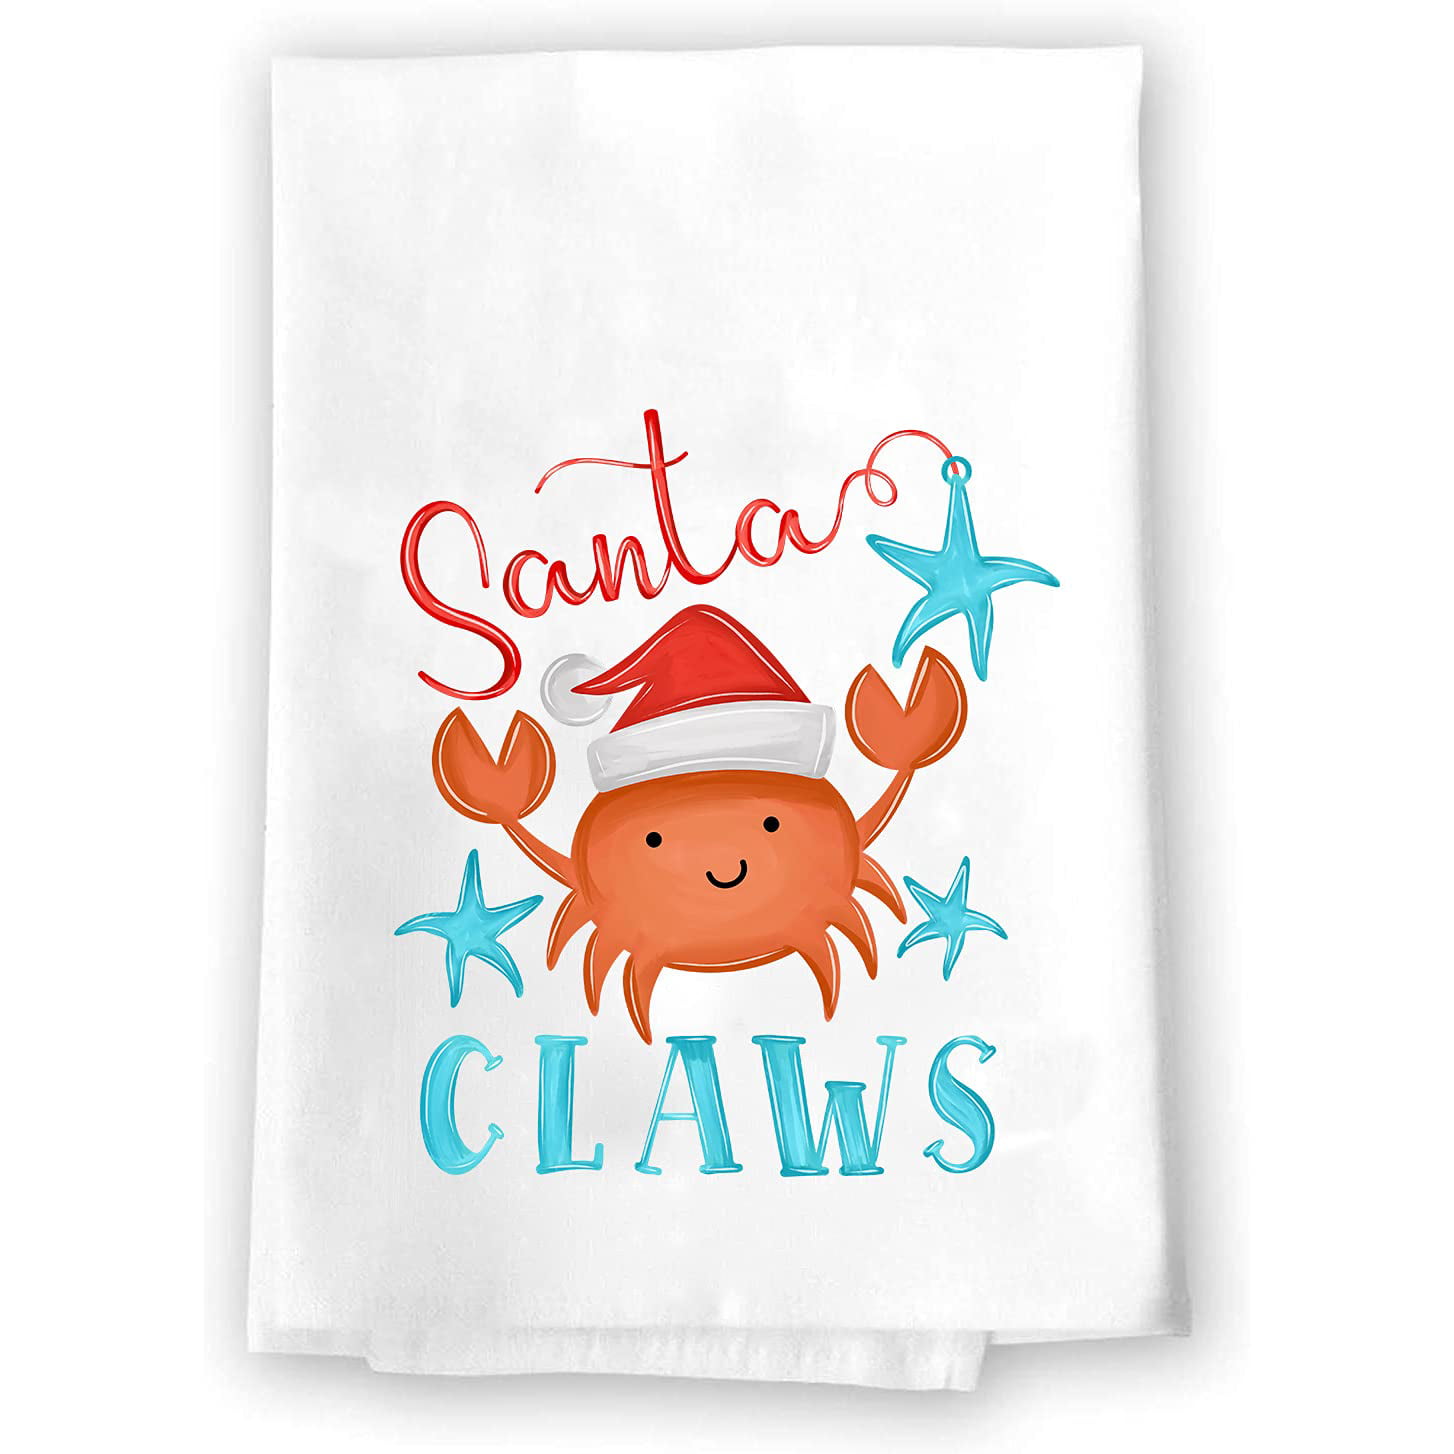 Gift Present White Towel Home Holiday Decorations Winter home Christmas Decor Decorative Kitchen and Bath Hand Towels XMAS Christmas Novelty Classic Cardinal 